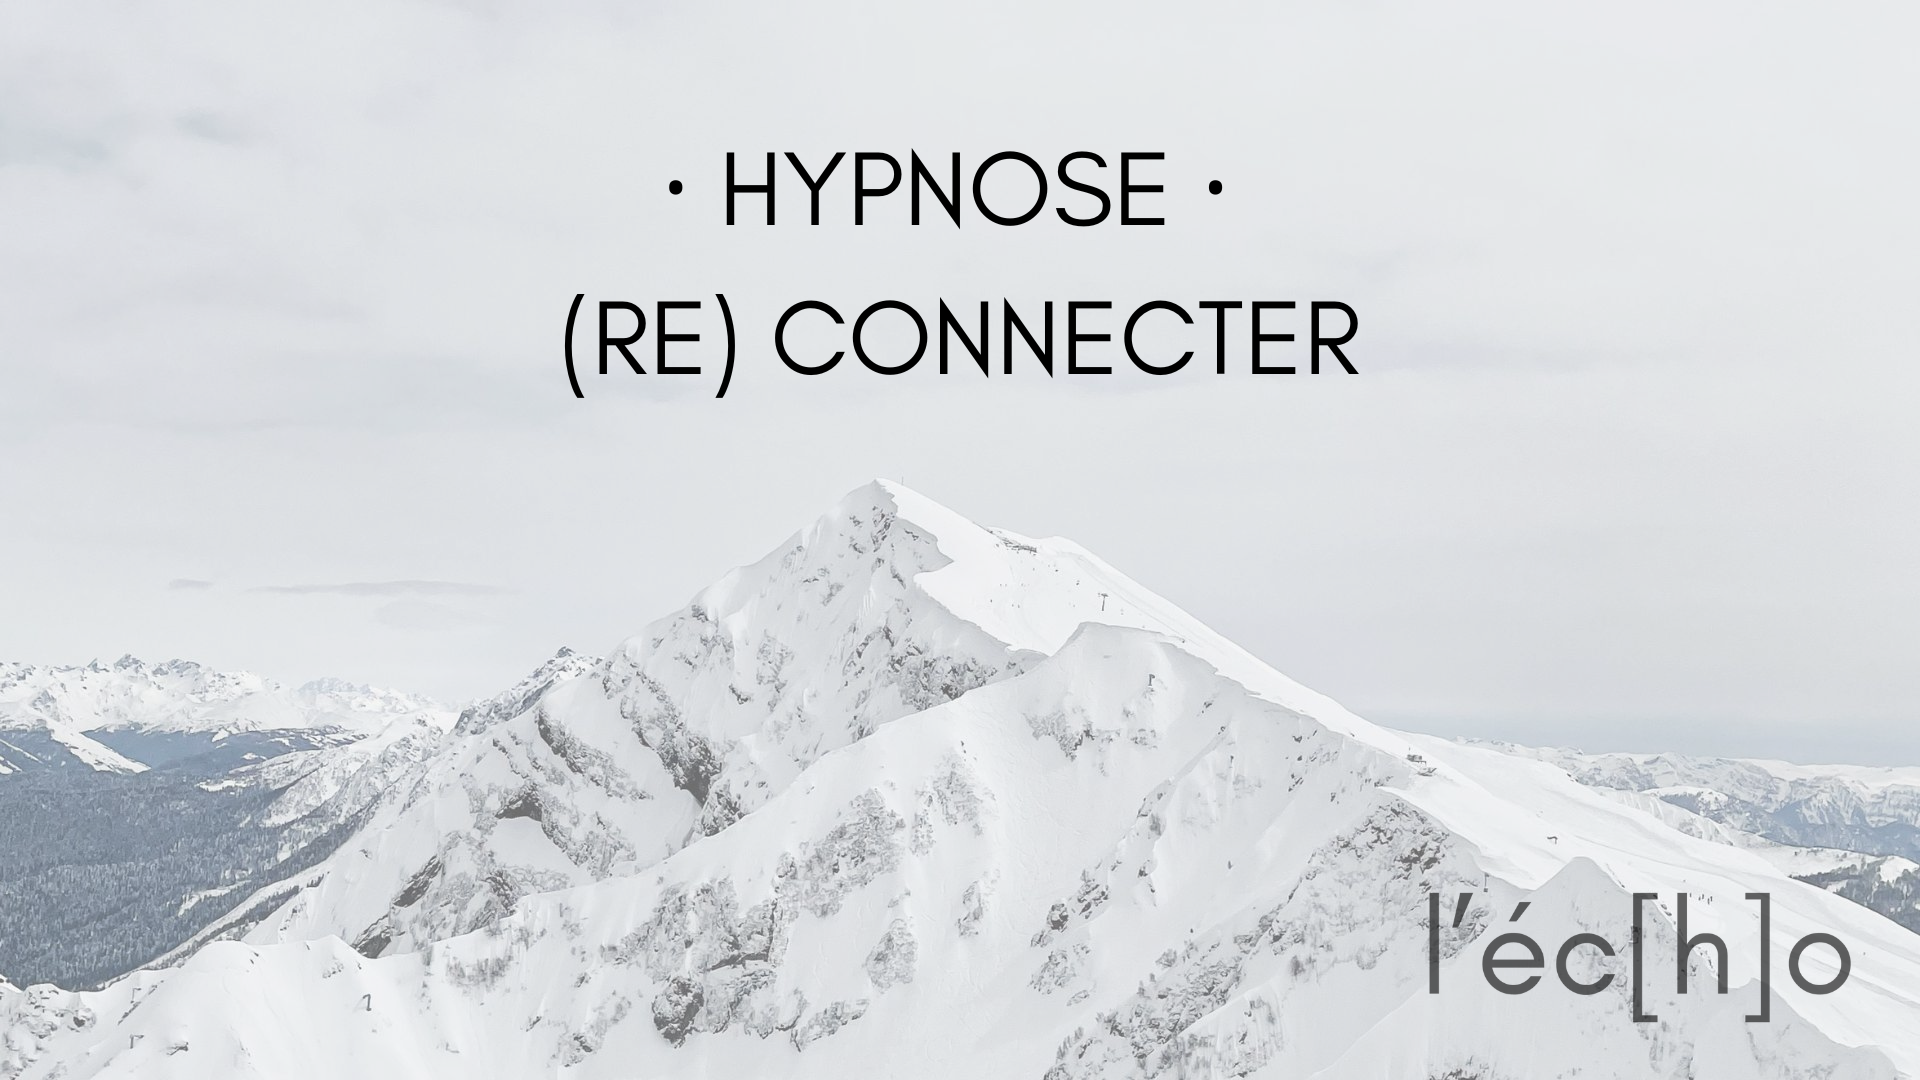 Hypnose - reconnecter